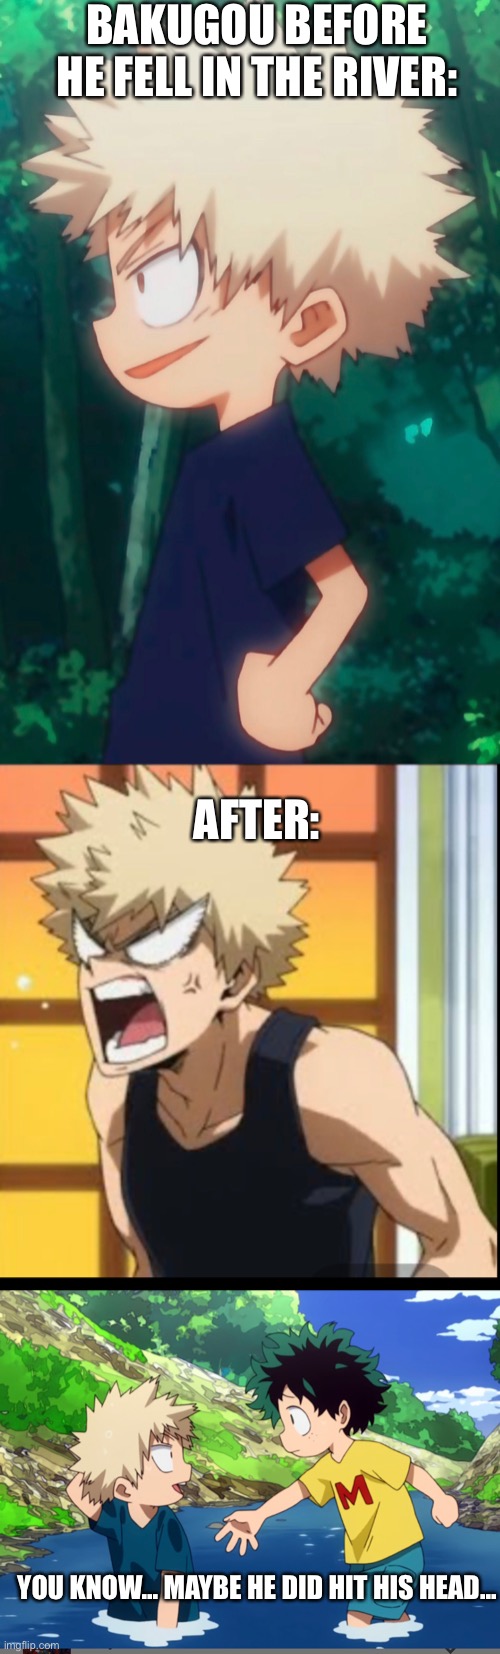 MeMbErS oF tHe AgEnCy BaKuGoU | BAKUGOU BEFORE HE FELL IN THE RIVER:; AFTER:; YOU KNOW... MAYBE HE DID HIT HIS HEAD... | image tagged in memes | made w/ Imgflip meme maker